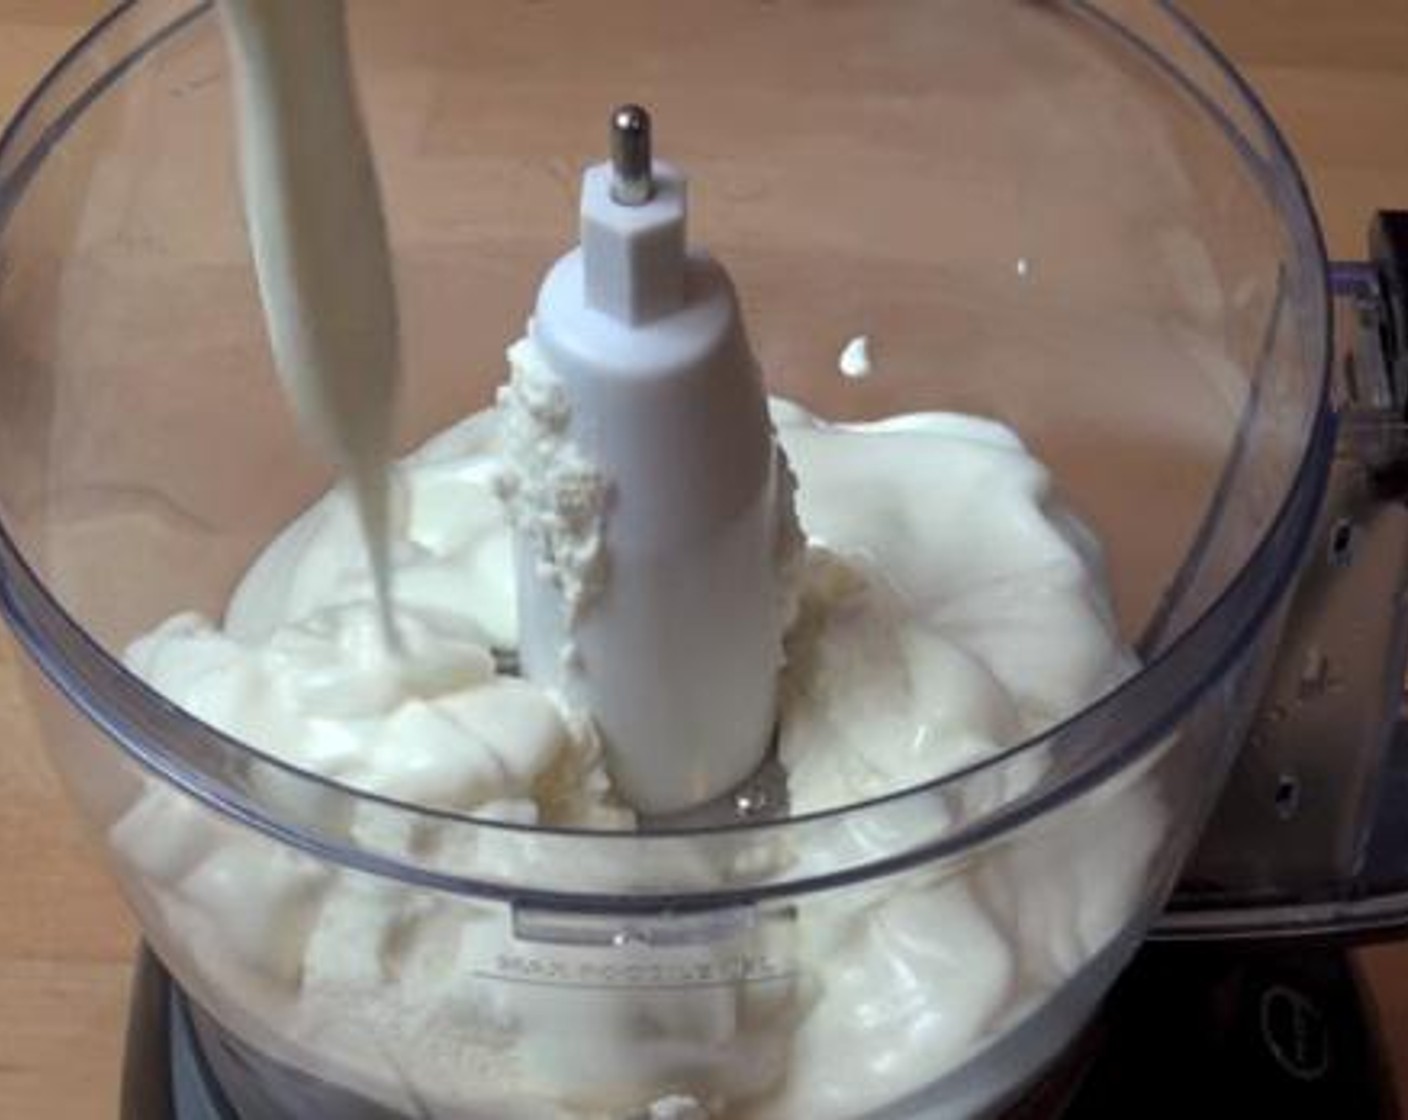 step 2 After cleaning your food processor, add in and mix the Ricotta Cheese (1 cup), and Vanilla Yogurt (1 cup).